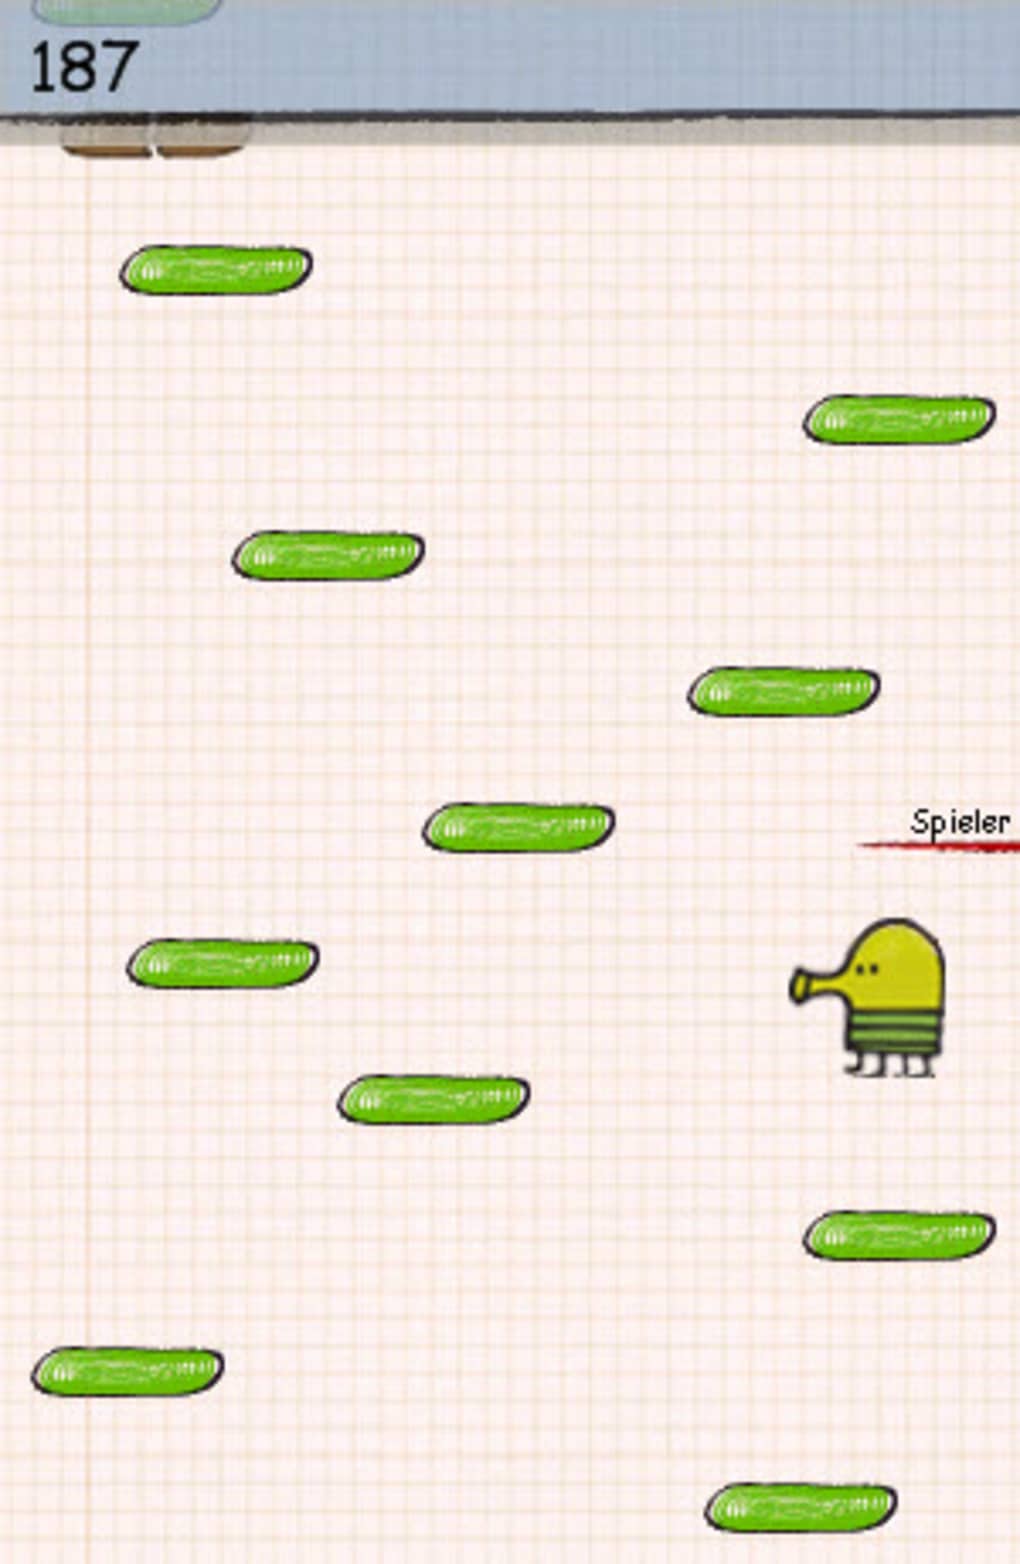 DOODLE JUMP free online game on